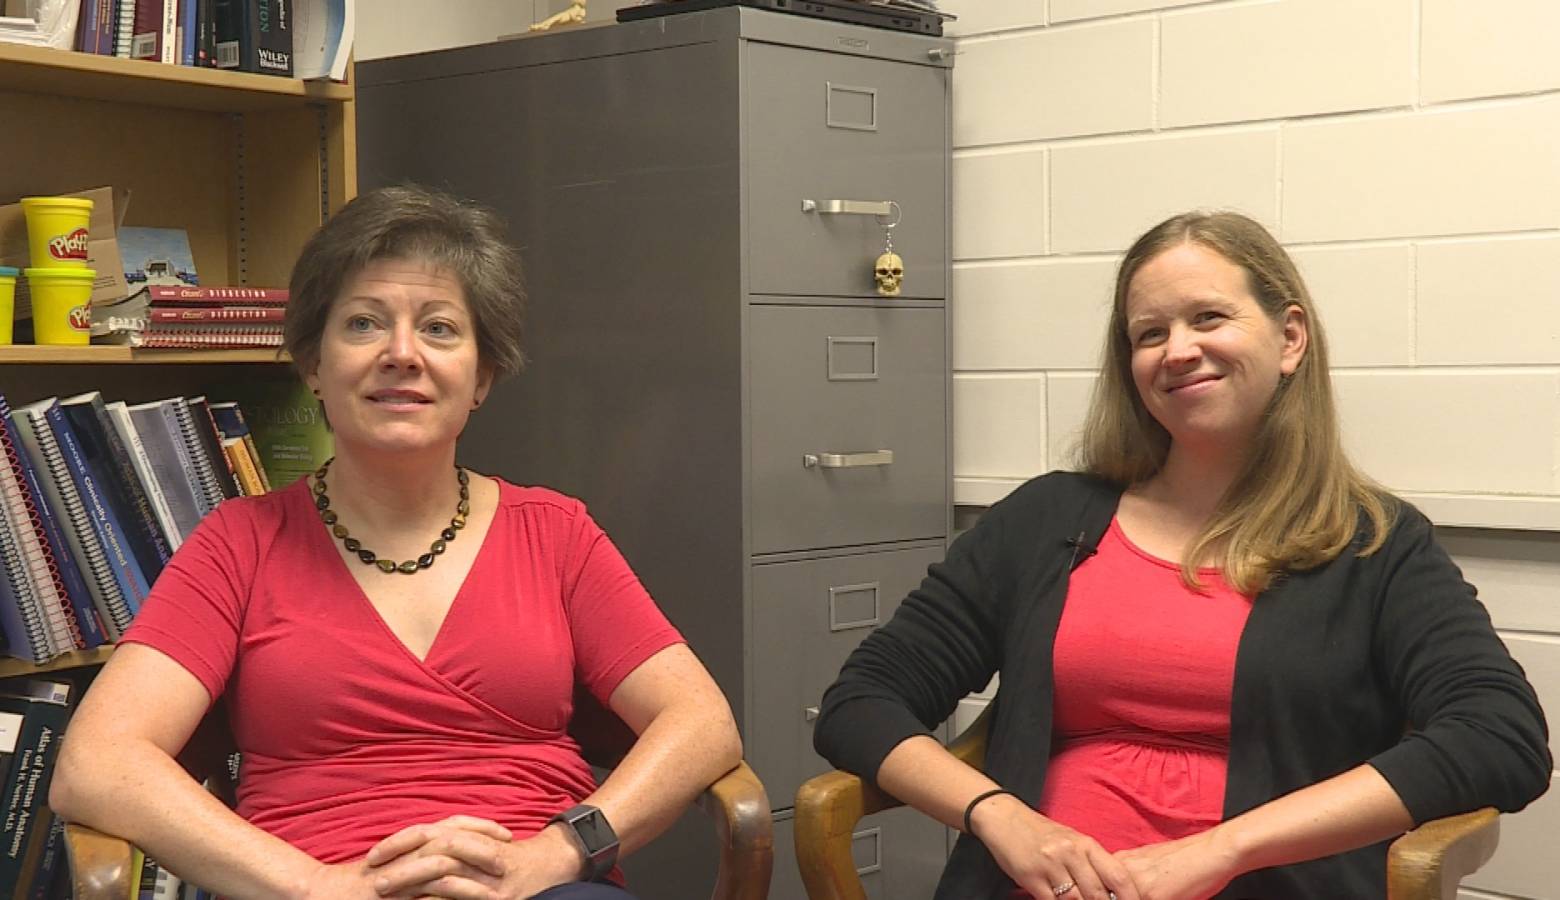 Valerie O’Loughlin (right) and Polly Husmann (left) co-authored a study about learning styles that says the categorization of learners may not be as important to student success as previously thought. (Jeanie Lindsay/IPB News)